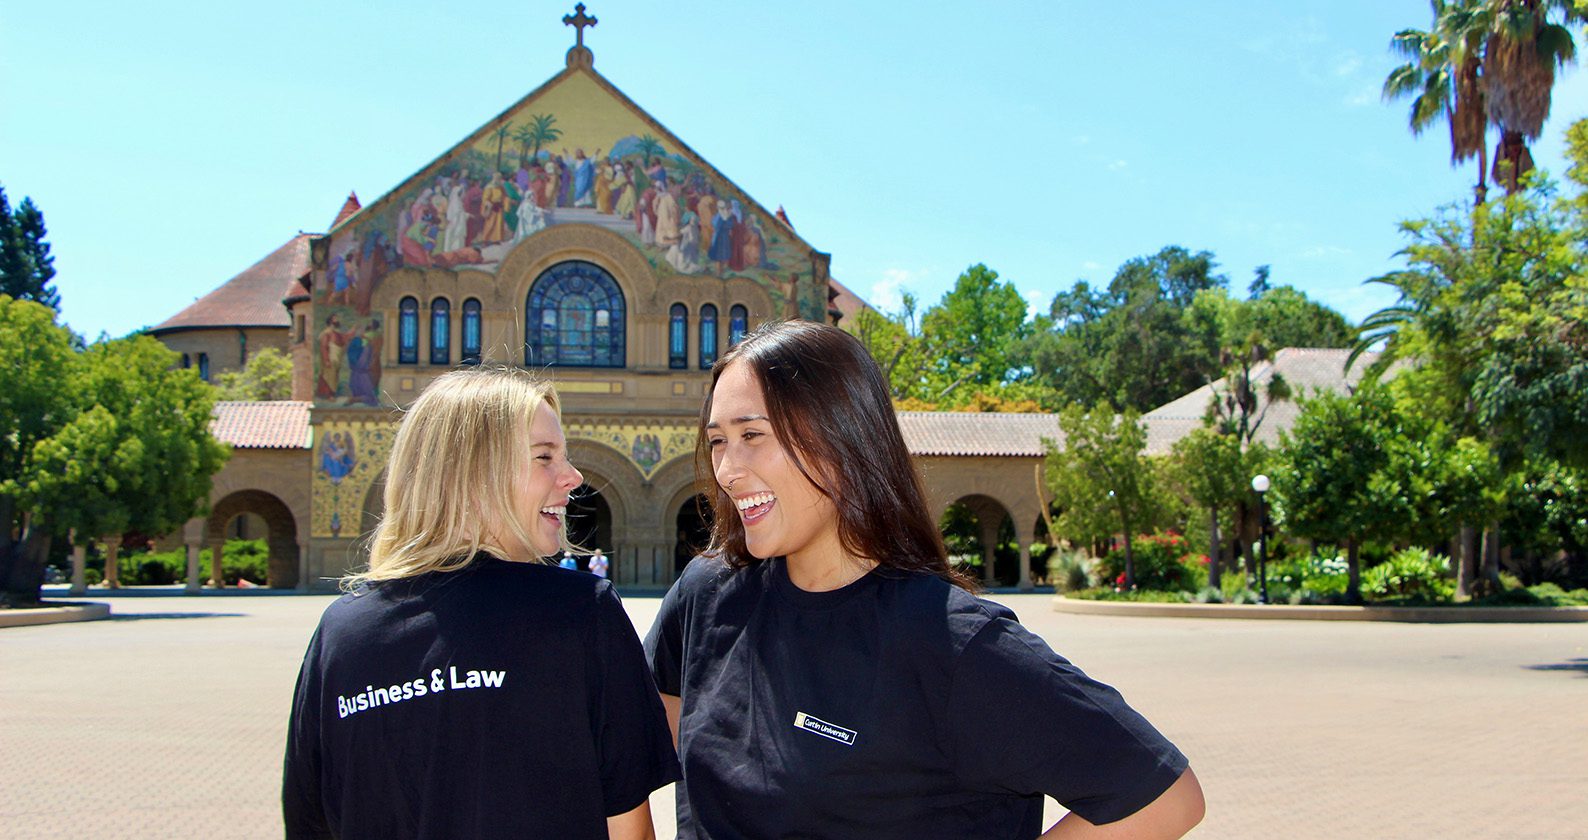 Two Business and Law students smiling and standing in front of a church.